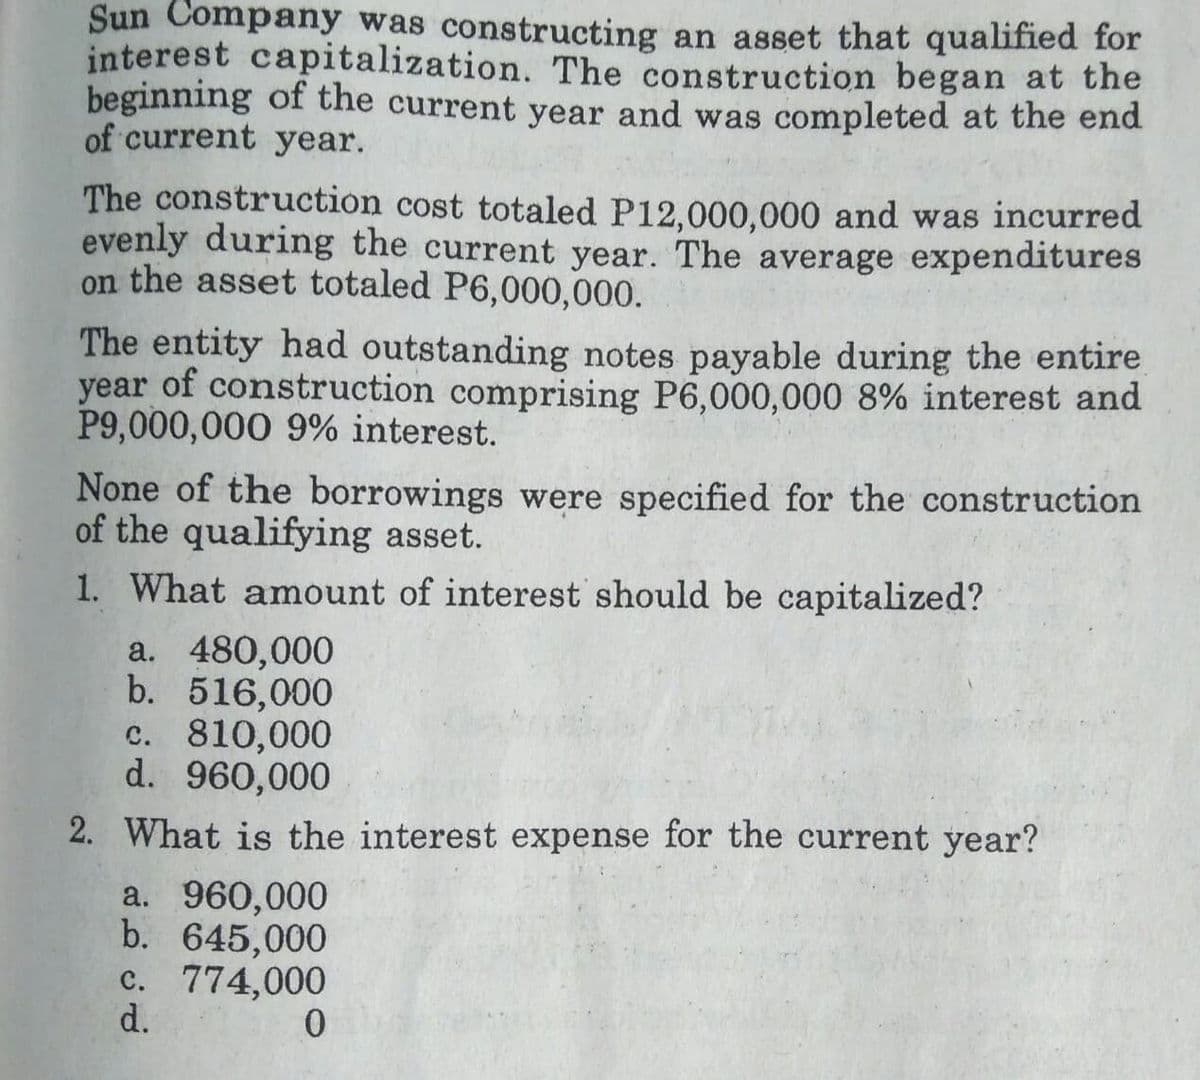 Sun Company was constructing an asset that qualified for
interest capitalization. The construction began at the
beginning of the current year and was completed at the end
of current year.
The construction cost totaled P12,000,000 and was incurred
evenly during the current year. The average expenditures
on the asset totaled P6,000,000.
The entity had outstanding notes payable during the entire
year of construction comprising P6,000,000 8% interest and
P9,000,000 9% interest.
None of the borrowings were specified for the construction
of the qualifying asset.
1. What amount of interest should be capitalized?
a. 480,000
b. 516,000
c. 810,000
d. 960,000
2. What is the interest expense for the current year?
a. 960,000
b. 645,000
c. 774,000
d.
